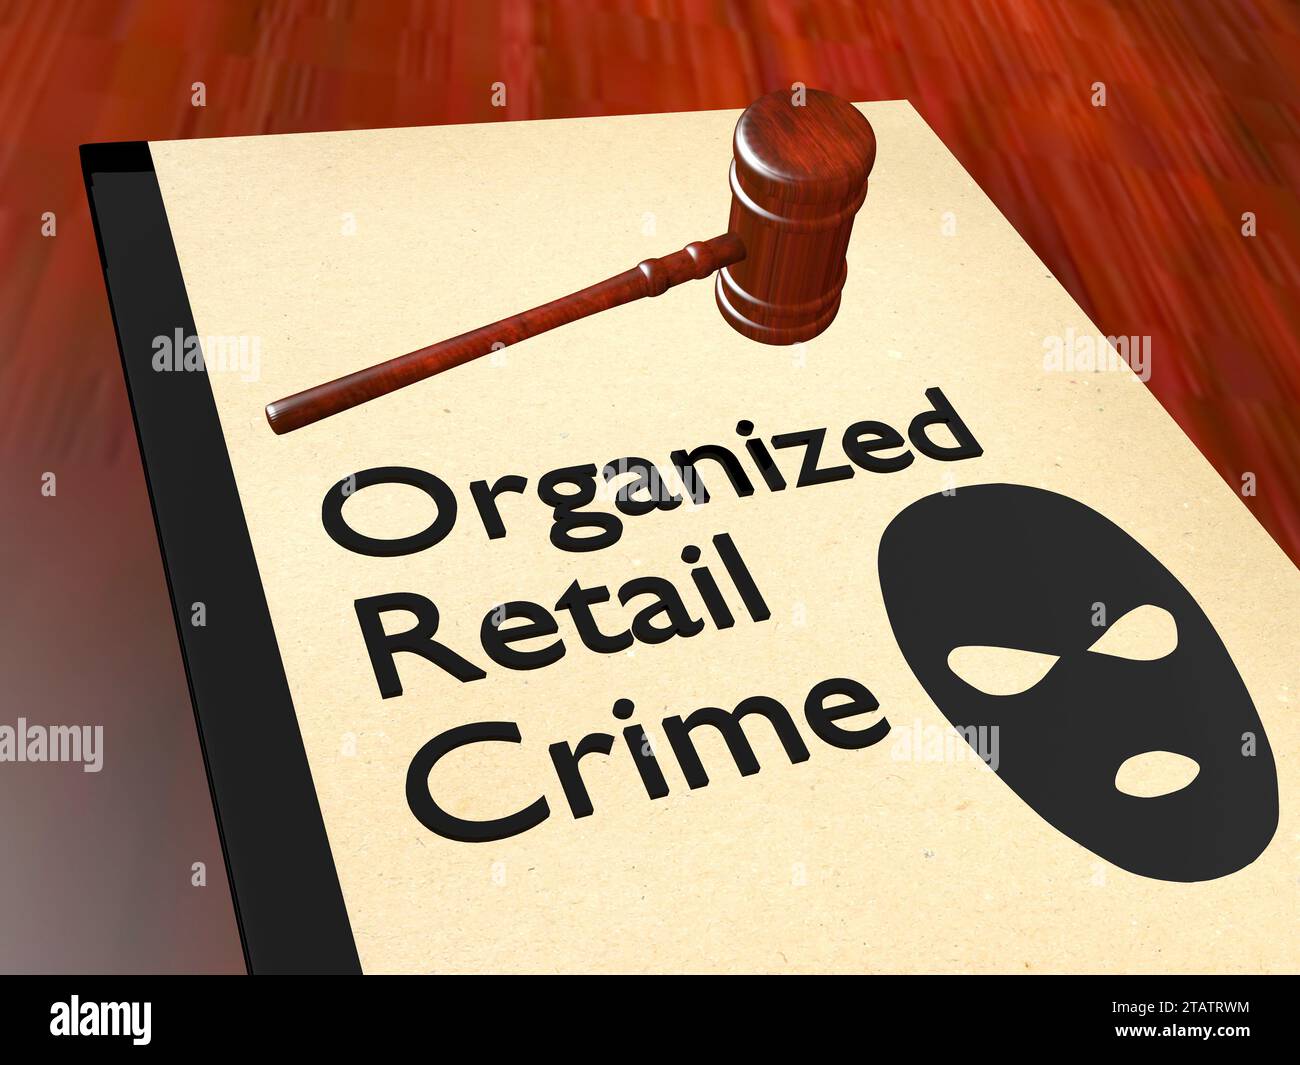 3D illustration of a legal gavel and a robber mask on legal booklet, titled as Organized Retail Crime. Stock Photo